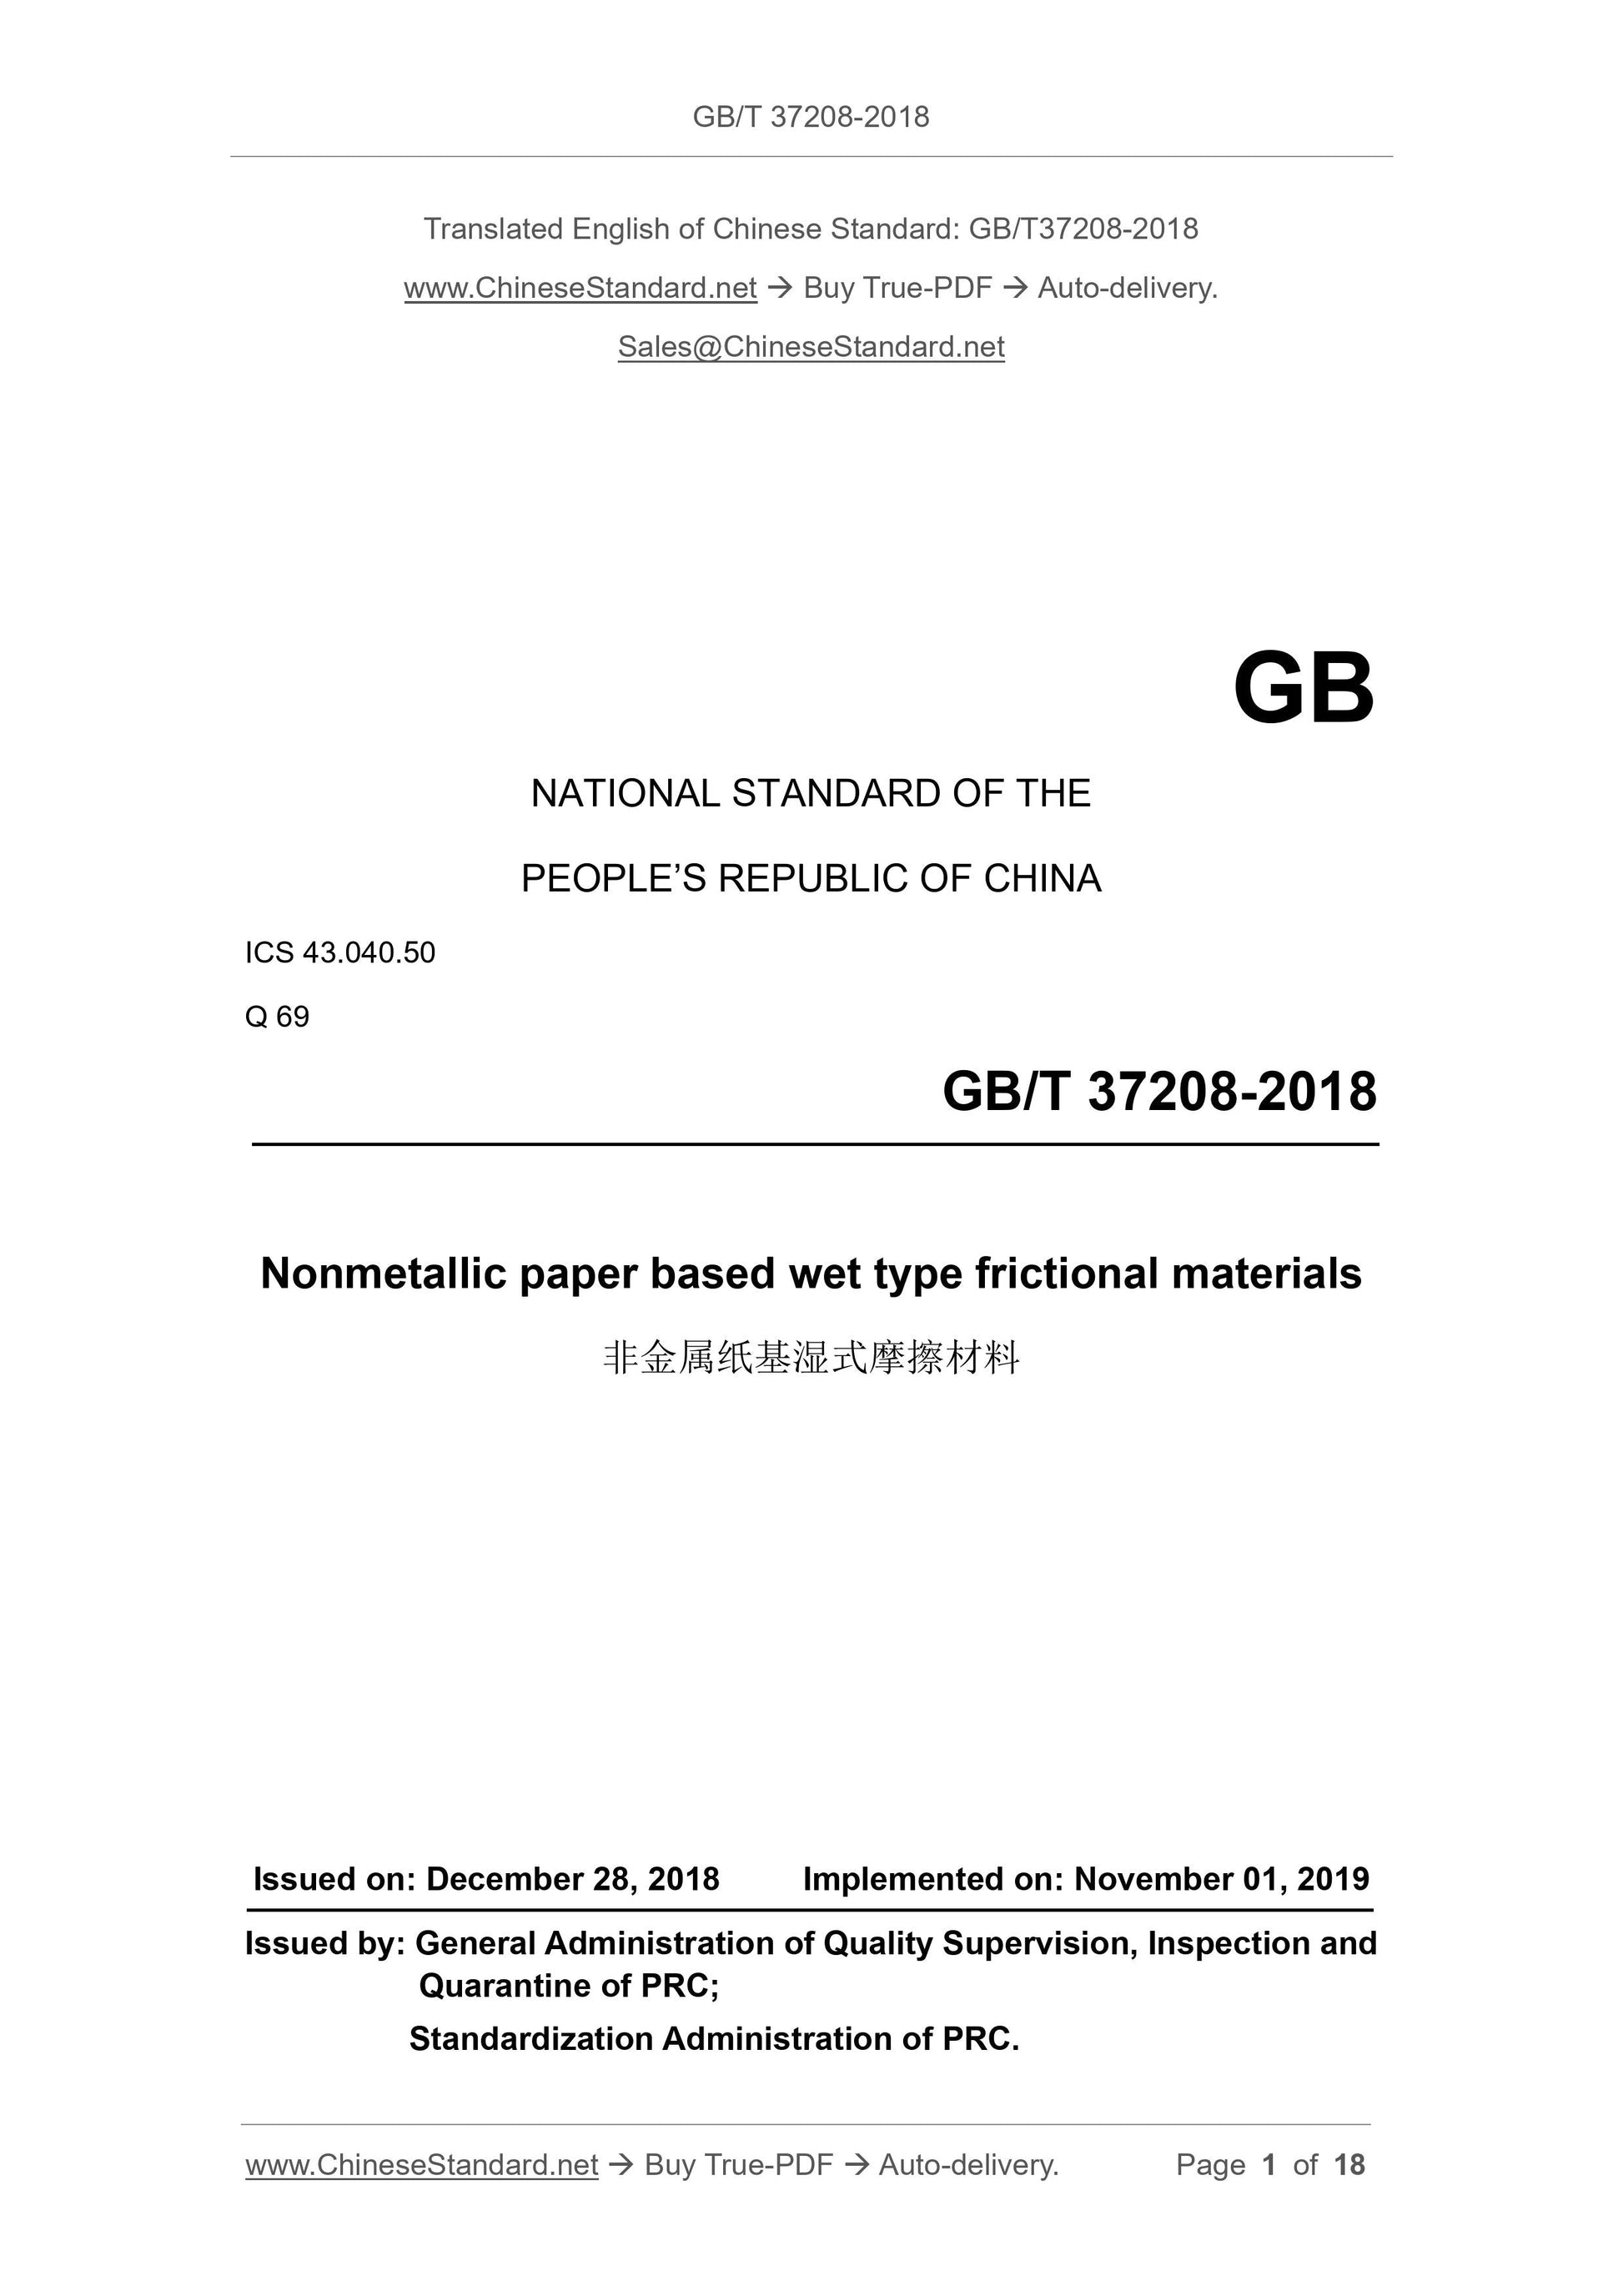 GB/T 37208-2018 Page 1